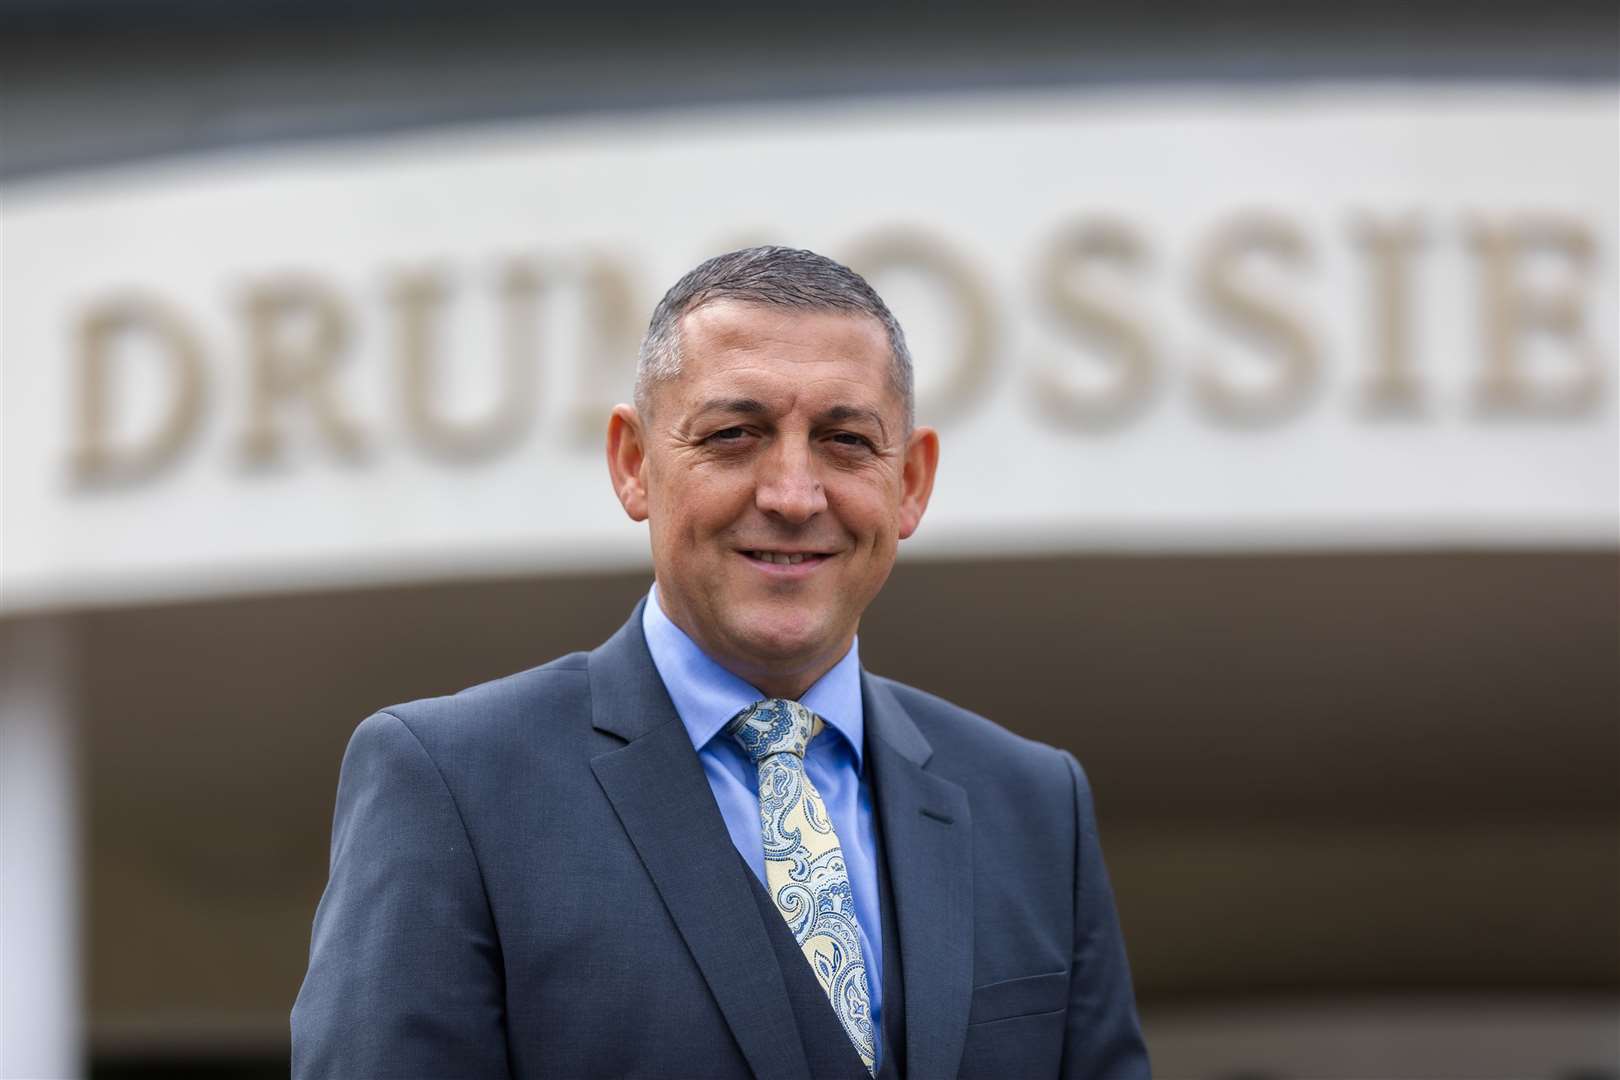 General manager of the Macdonald Drumossie Hotel, Inverness, Kenny Mcmillan, is looking forward to welcoming shortlistees and sponsors to the awards gala dinner and ceremony.